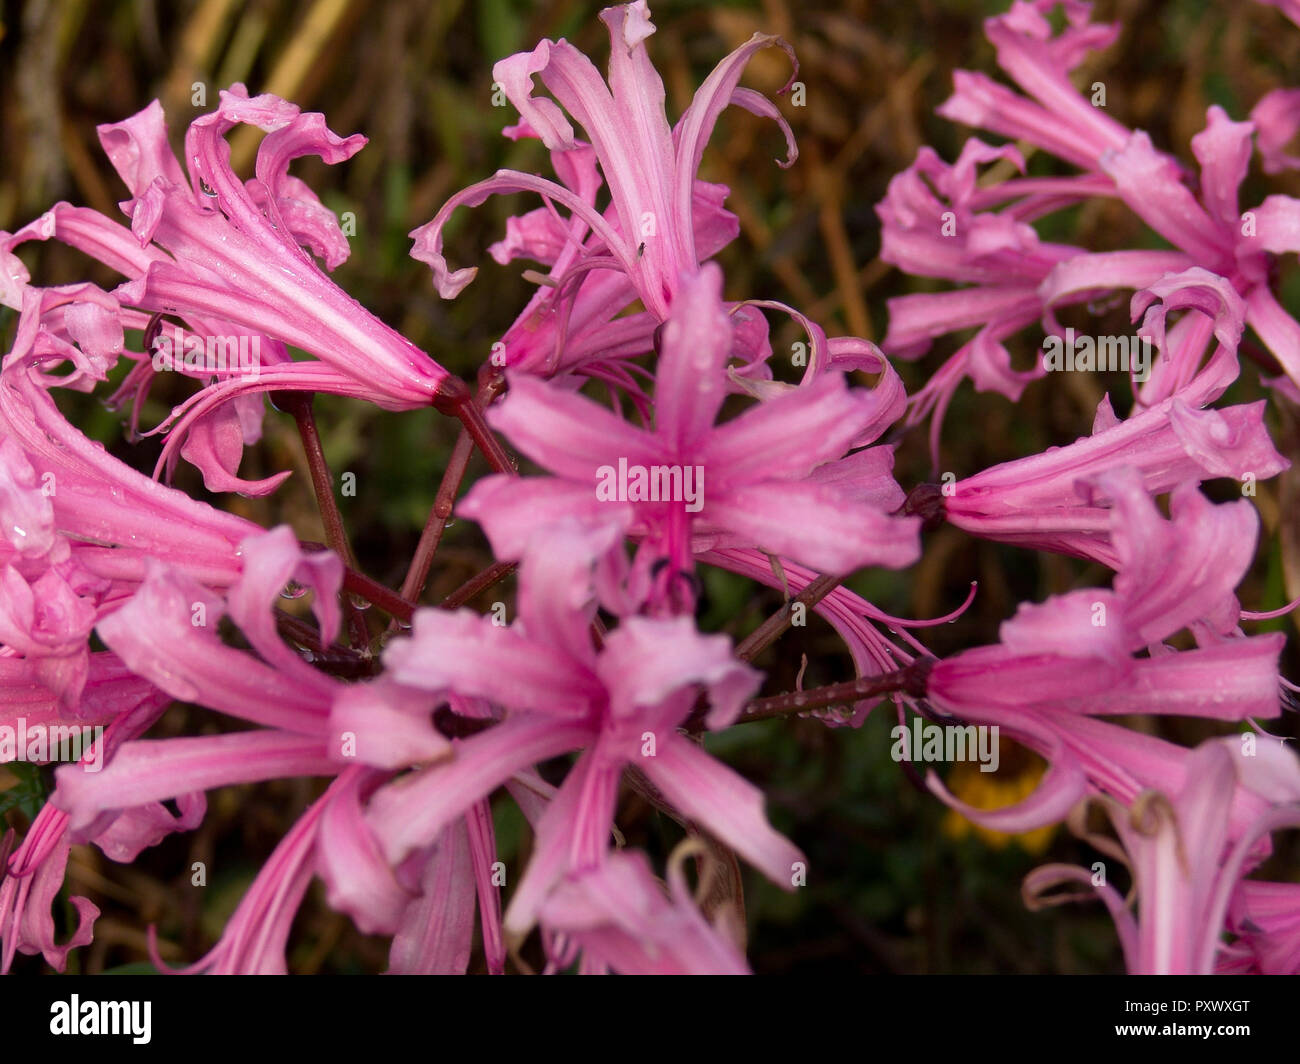 A close up shot of pink lilies outside, striped with white and all open, with rain drops on the flowers. Stock Photo